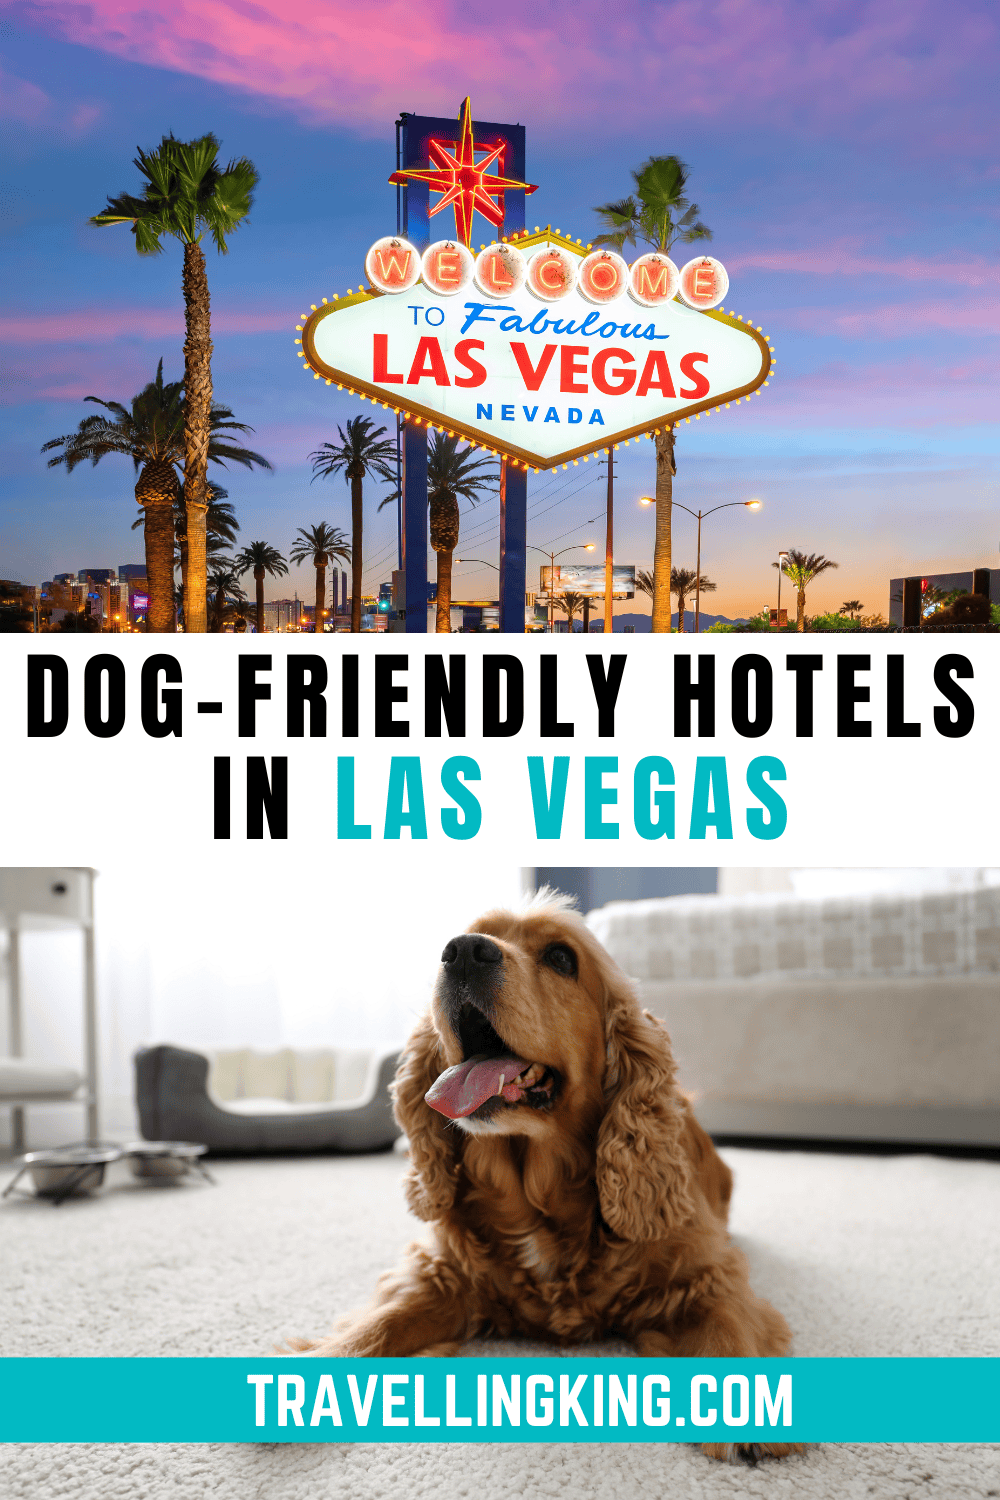 Best Dog-Friendly Hotels in Las Vegas: A Guide for Every Budget